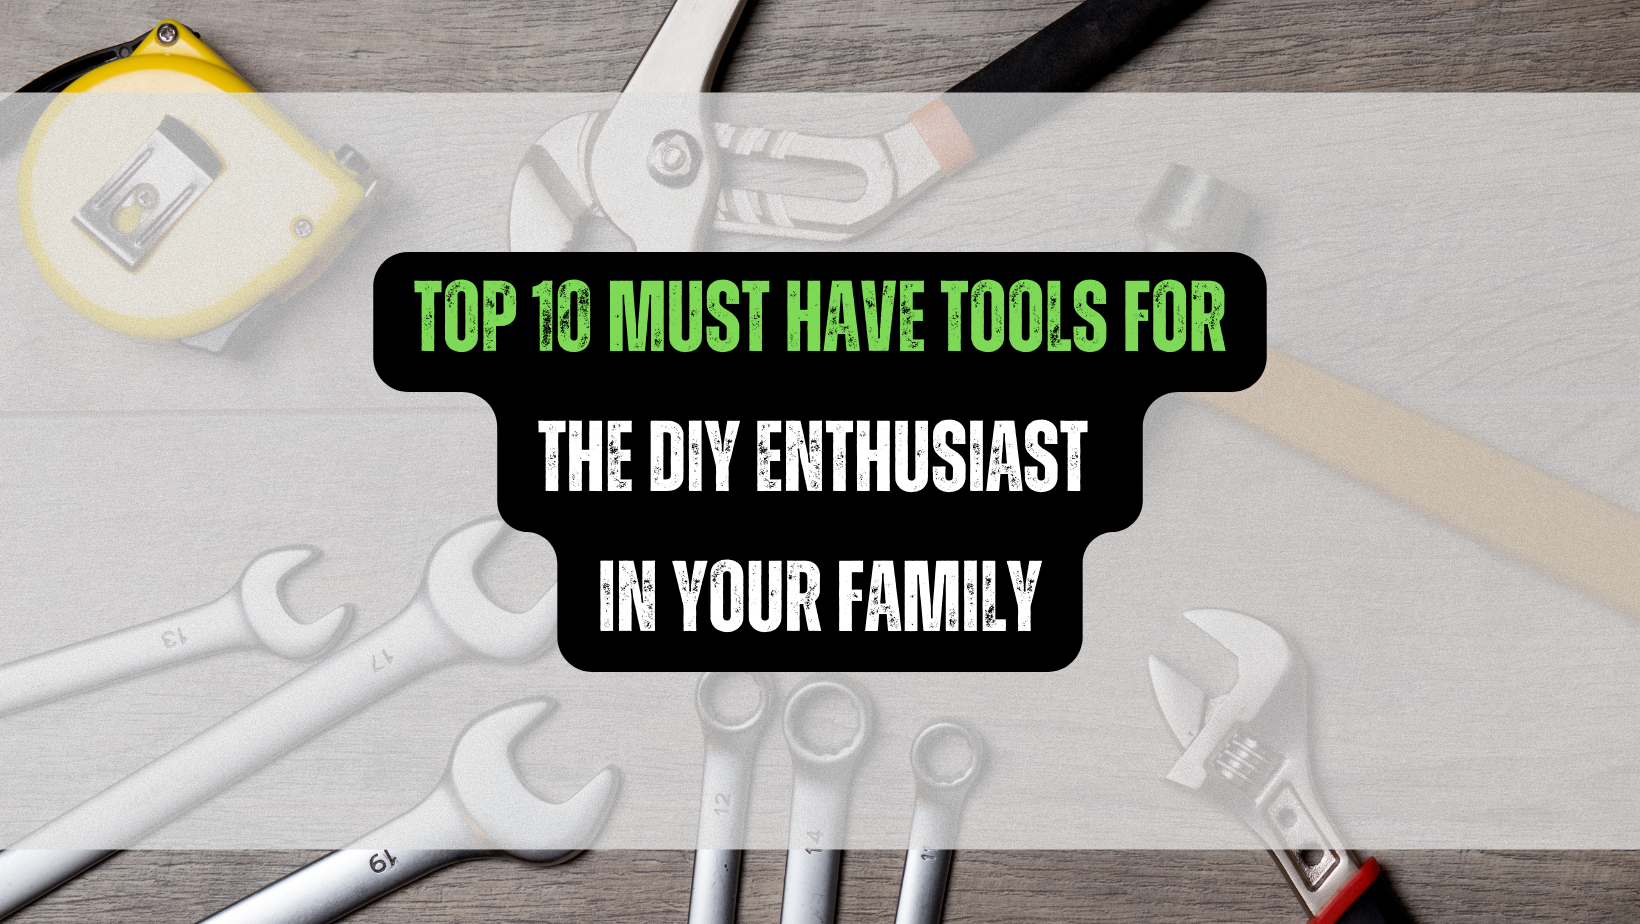 Top 10 Must Have Tools for the DIY Enthusiast in Your Family